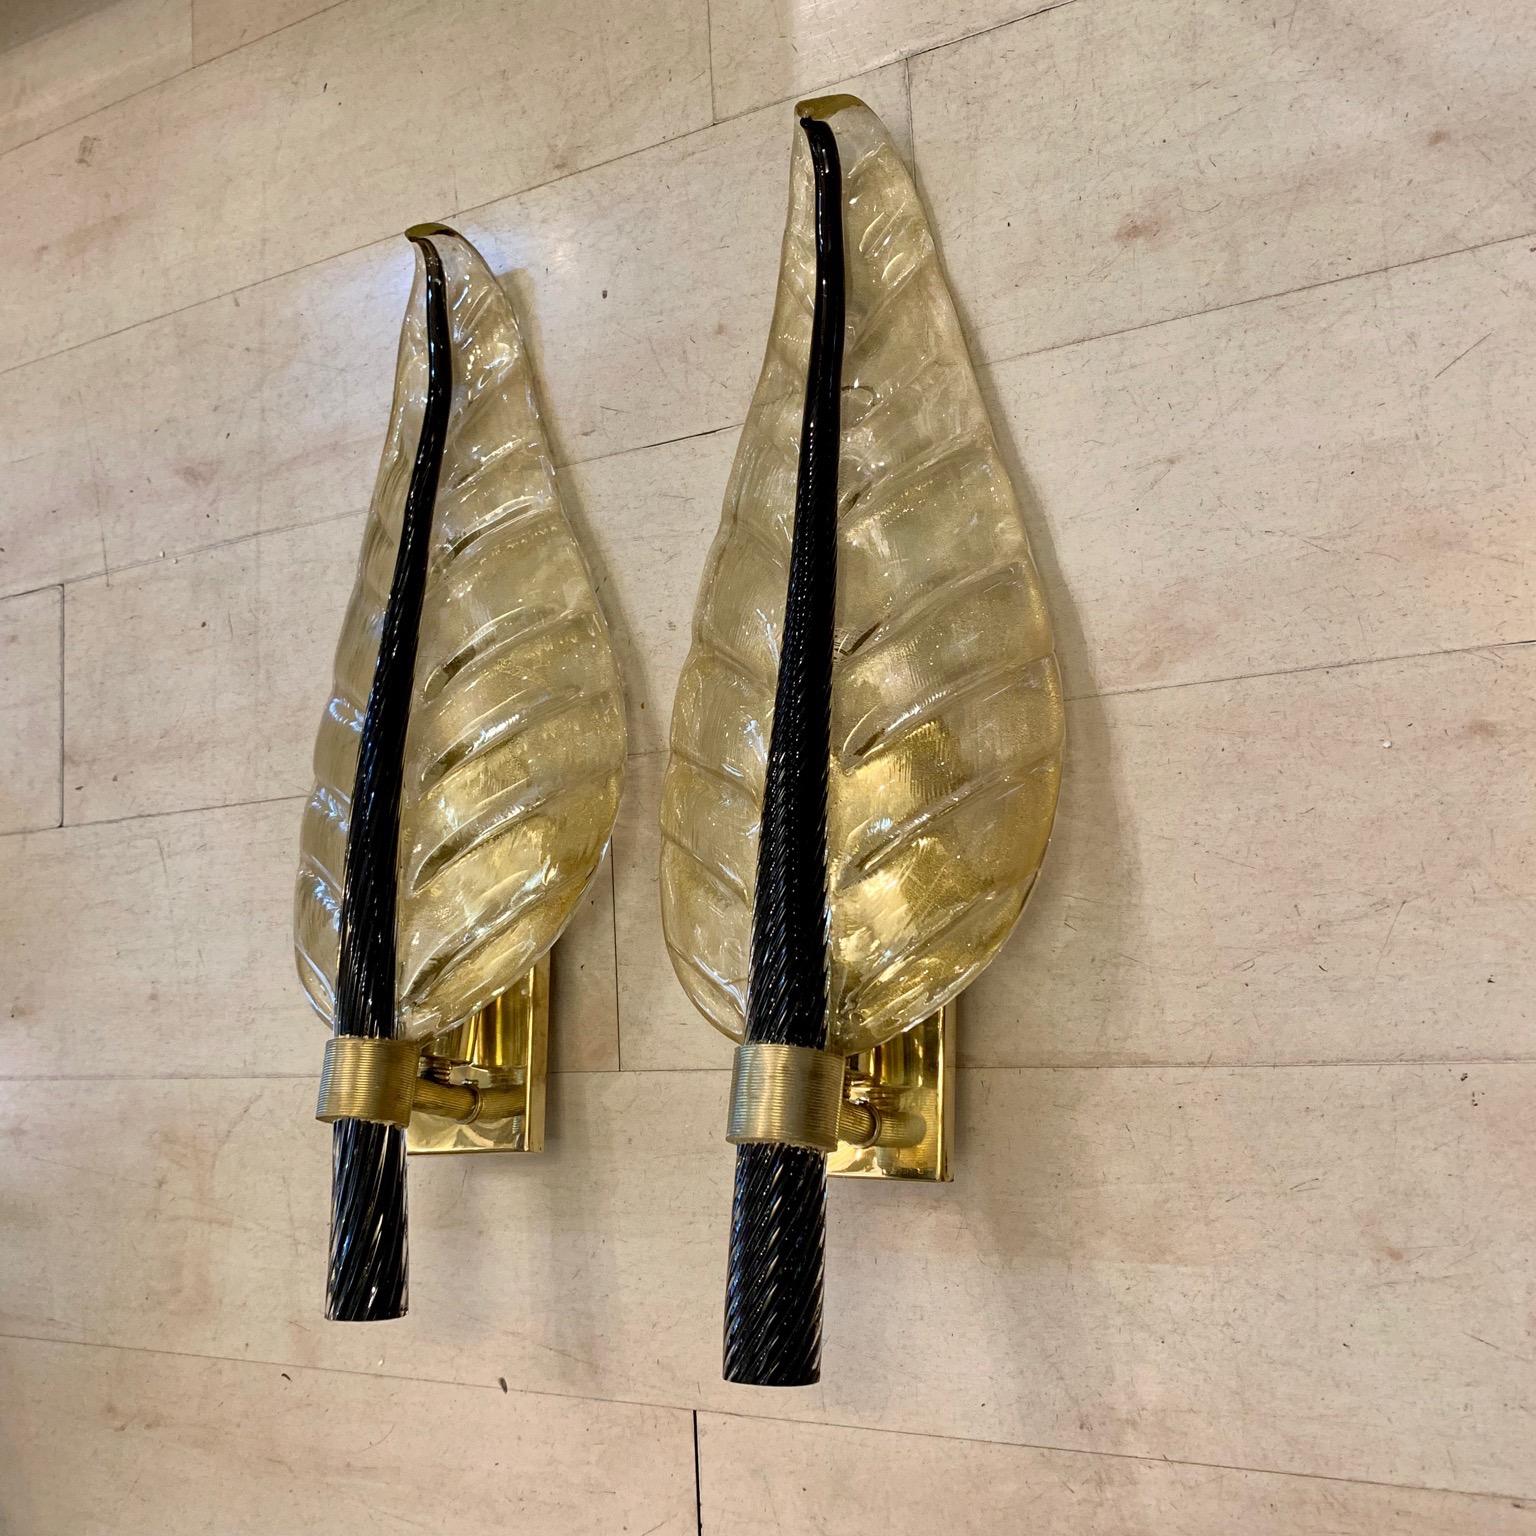 Pair of Murano glass gold leaf sconces with black torchon glass leaf stem, brass structure, one bulb for lamp.
These sconces are in Murano hand blown thick glass with gold flecks, the stem of the leaf is in full black torchon Murano glass.